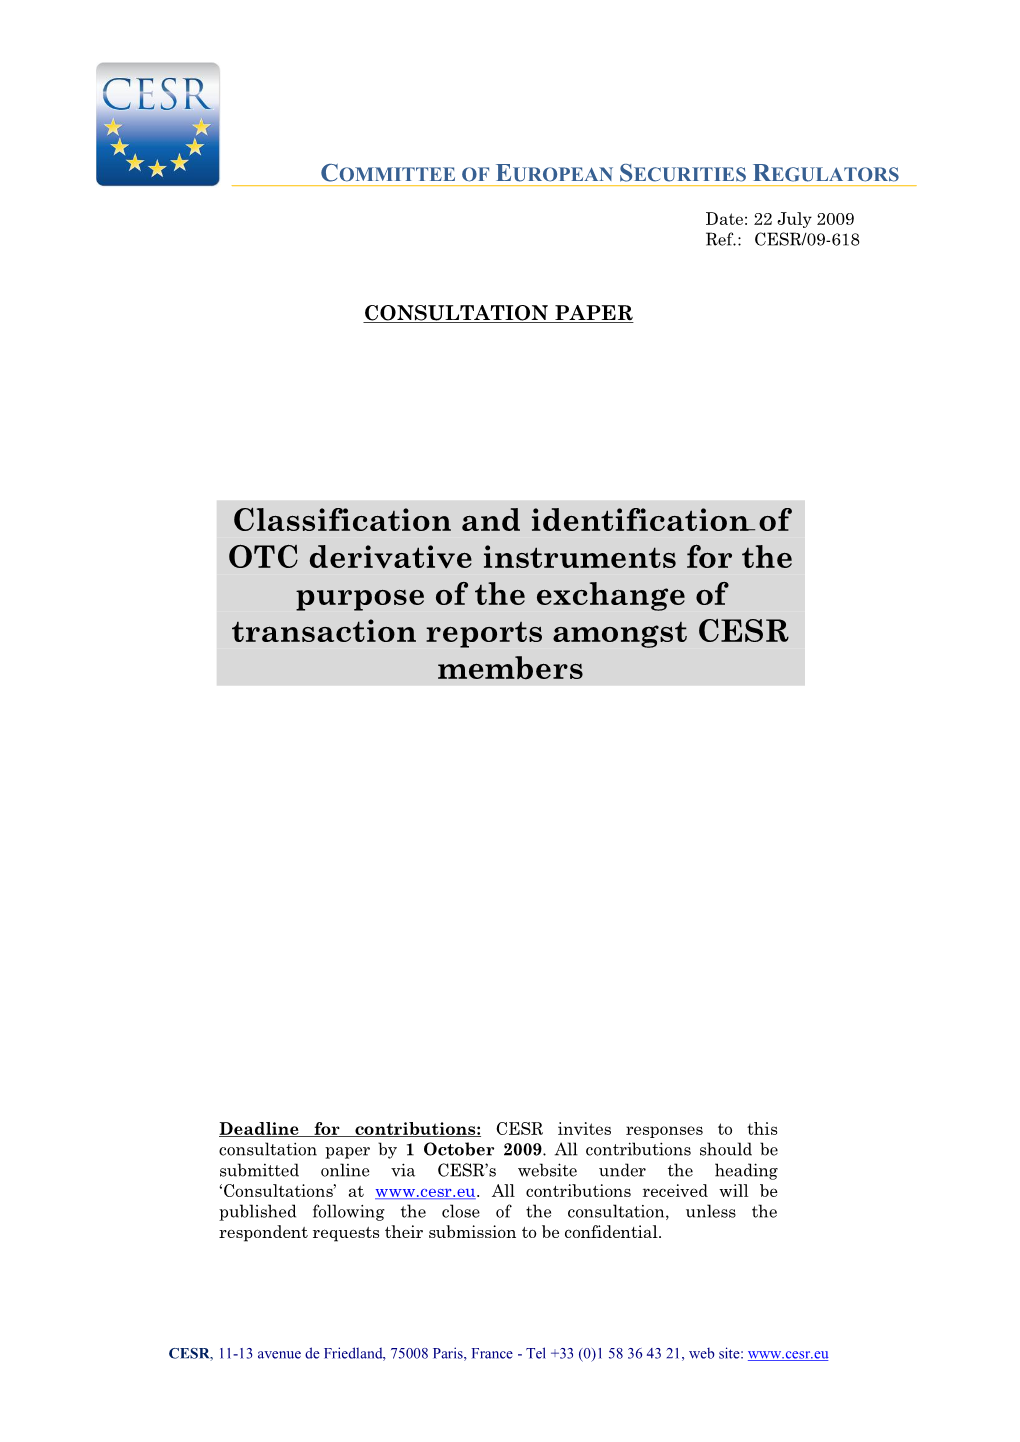 Classification and Identification of OTC Derivative Instruments for the Purpose of the Exchange of Transaction Reports Amongst CESR Members